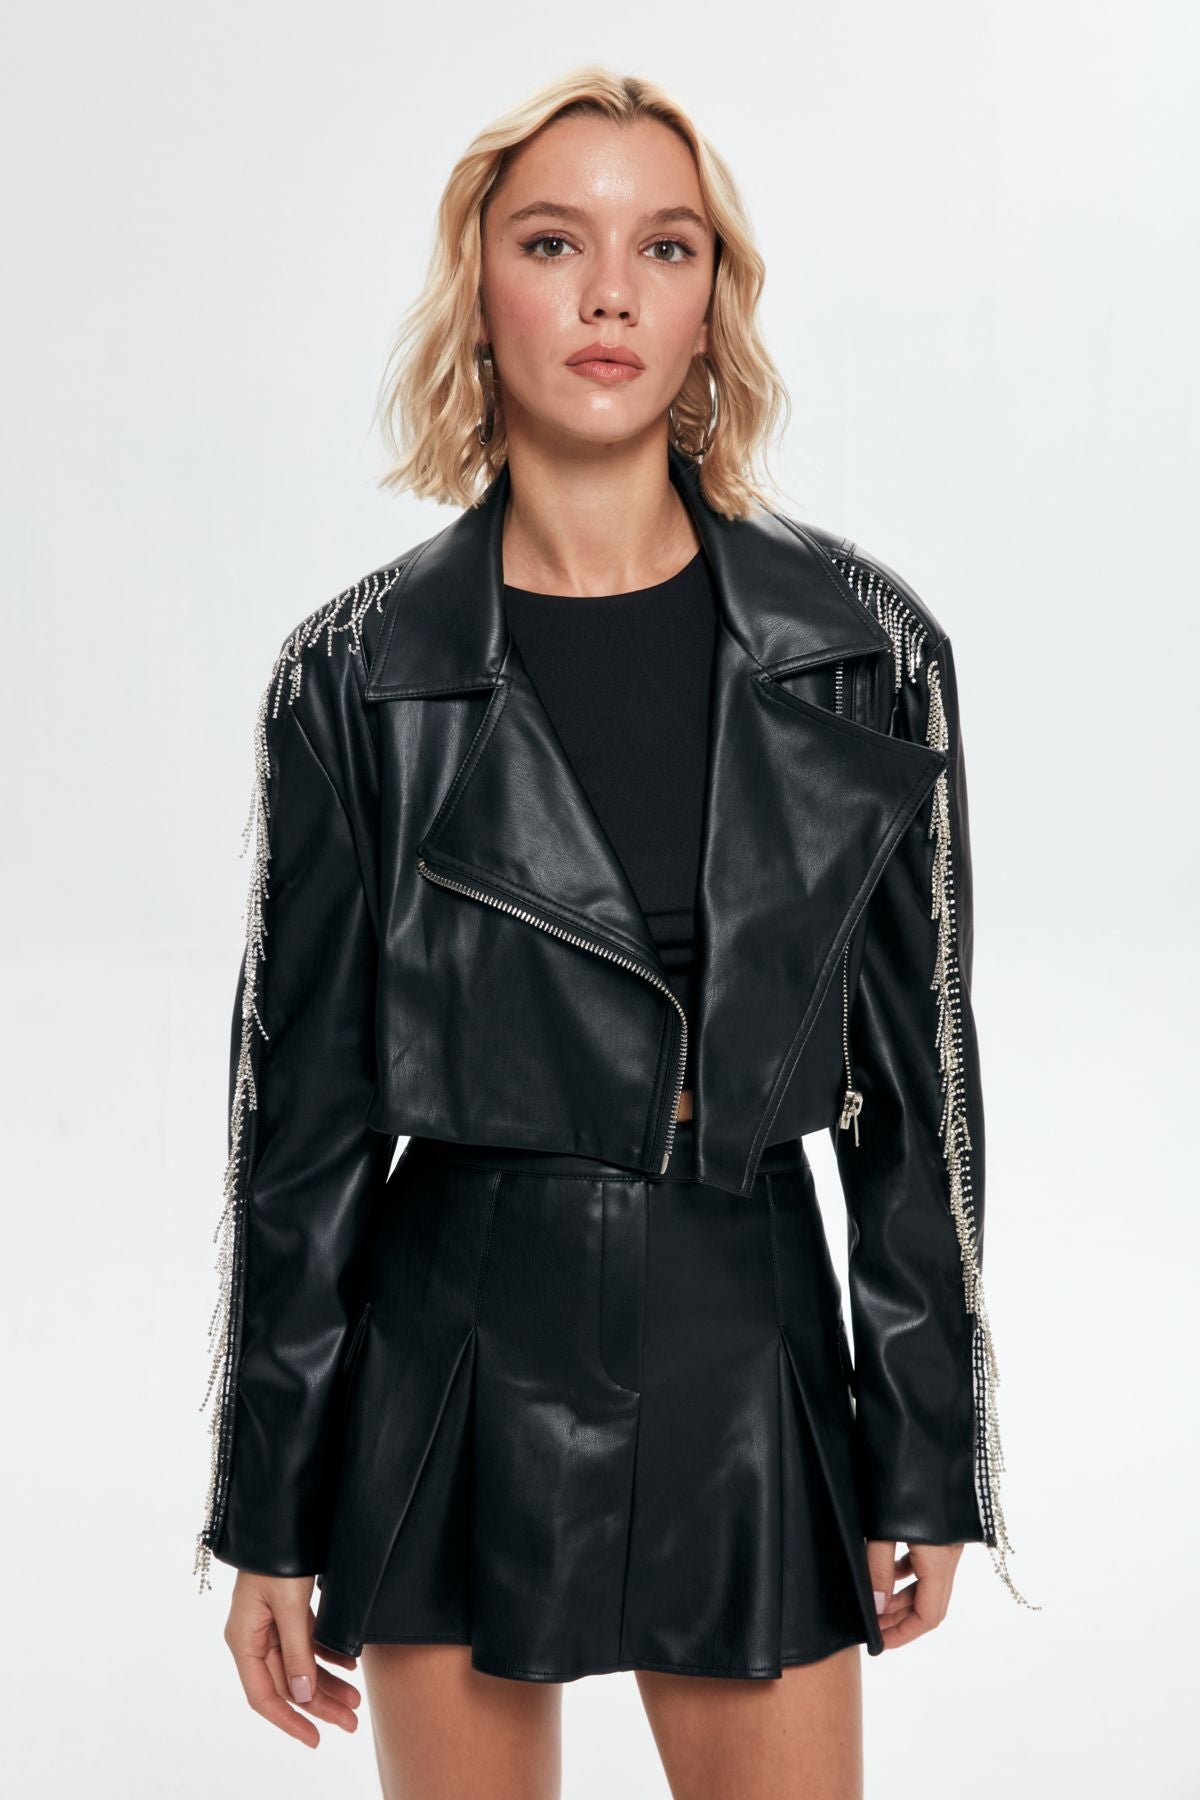 Crop Leather Jacket with Stone Accessories Black